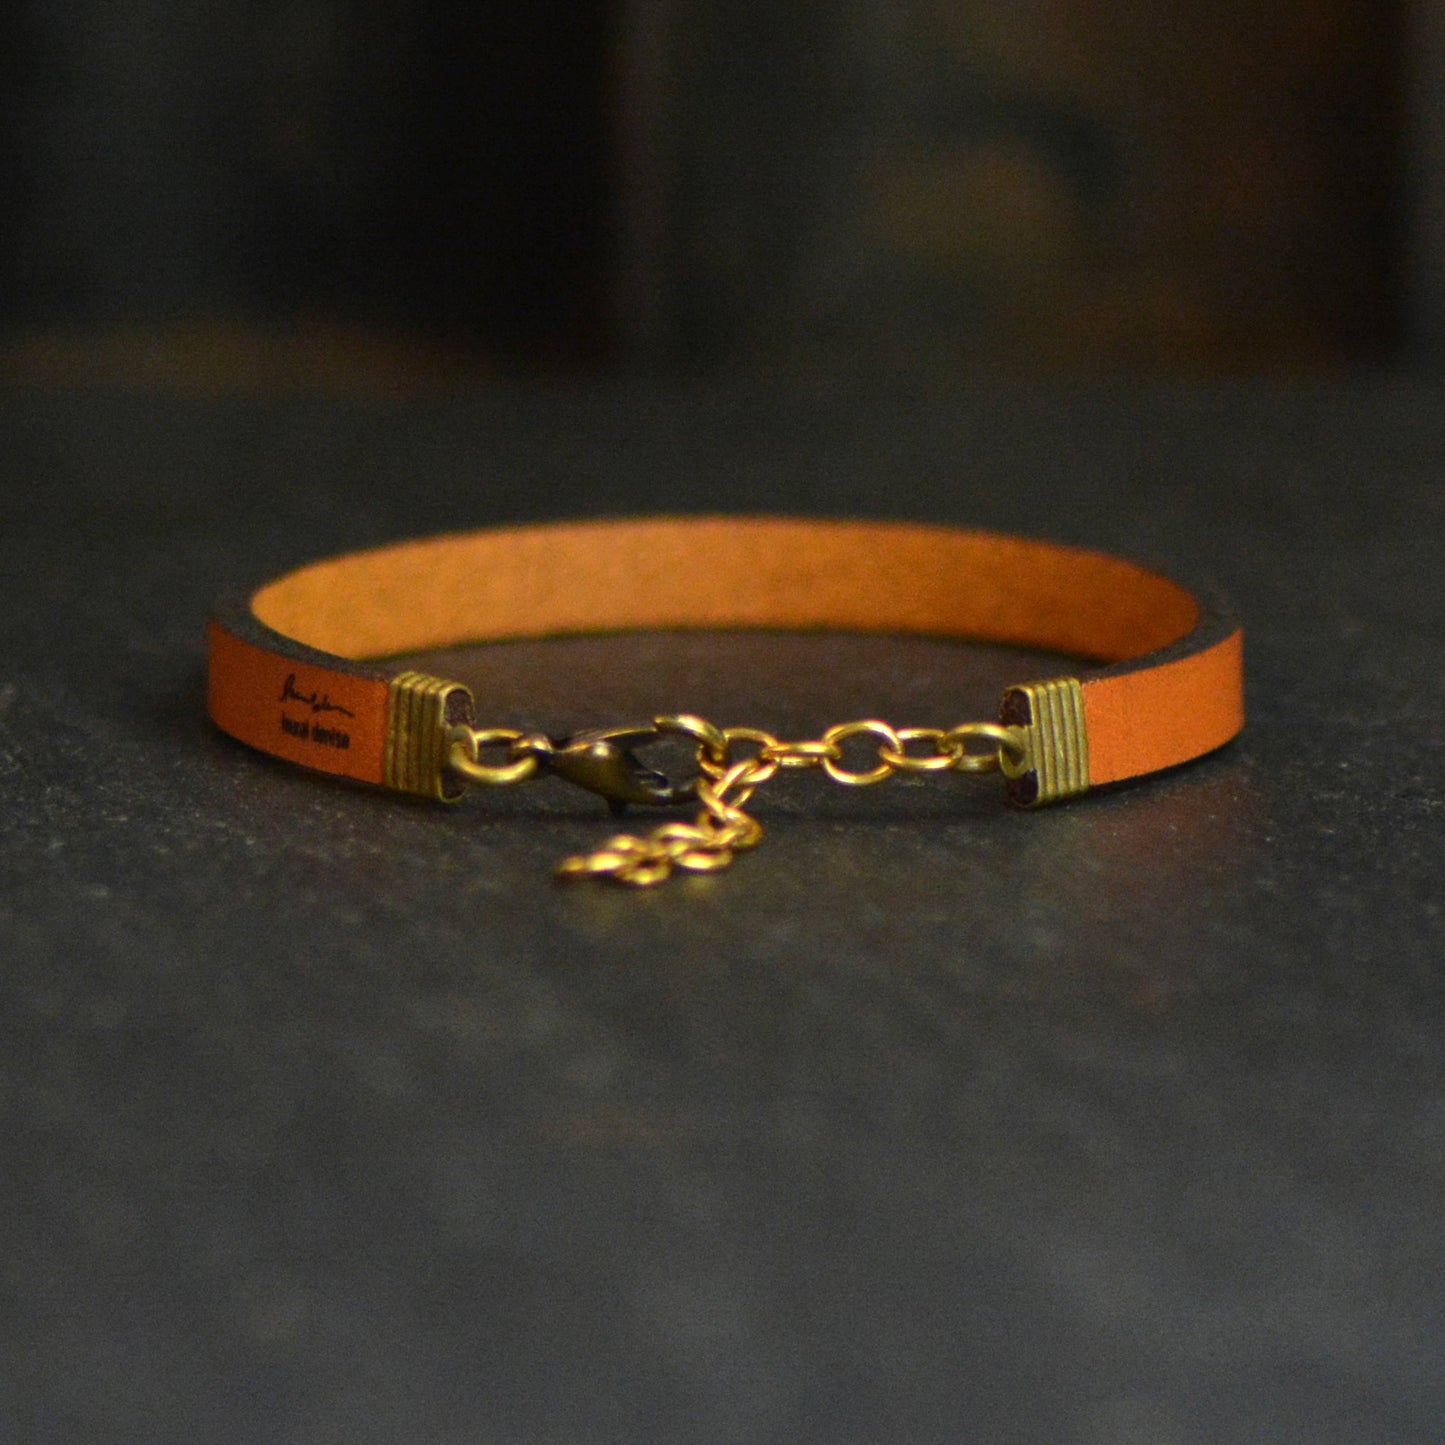 I Carry Your Heart, I Carry it in My Heart - Leather Bracelet